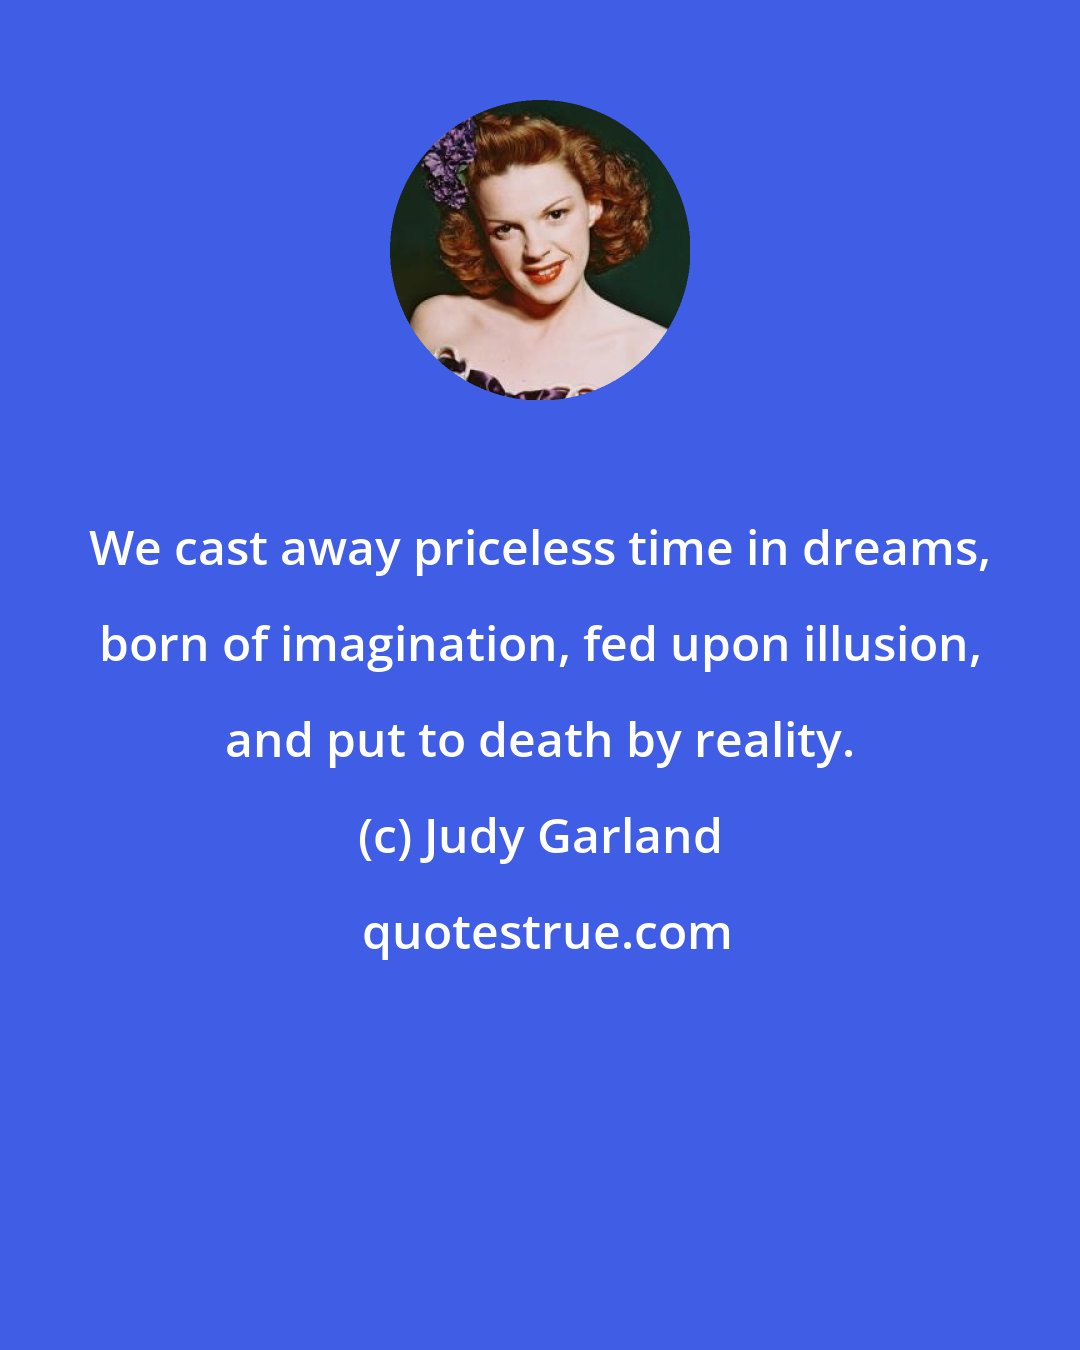 Judy Garland: We cast away priceless time in dreams, born of imagination, fed upon illusion, and put to death by reality.